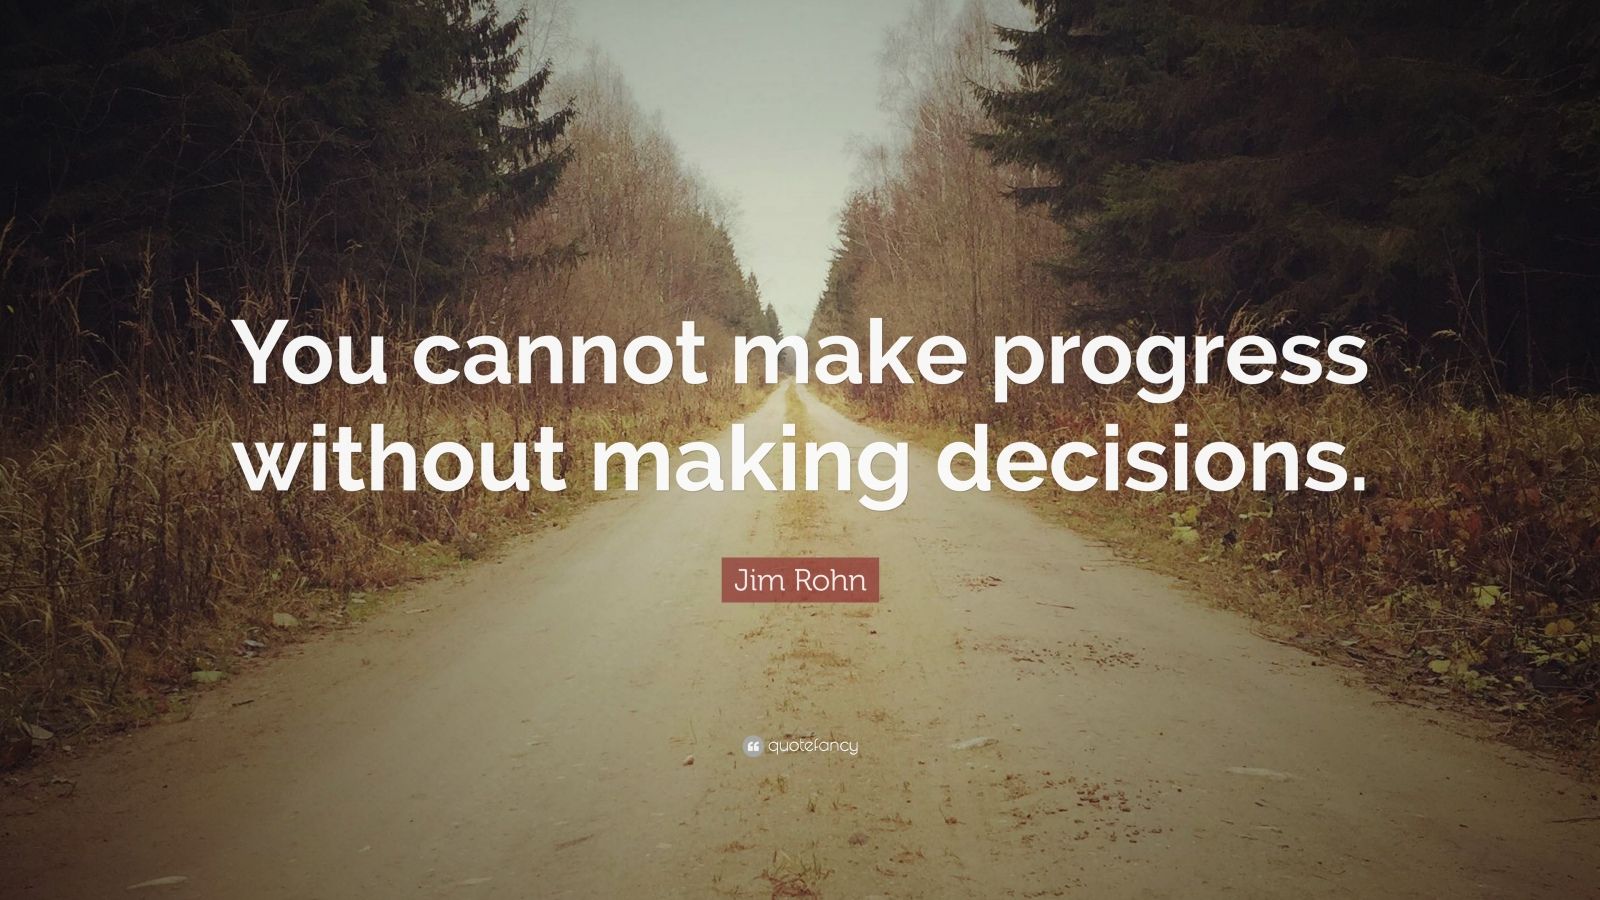 Decision Quotes (40 wallpapers) - Quotefancy1600 x 900